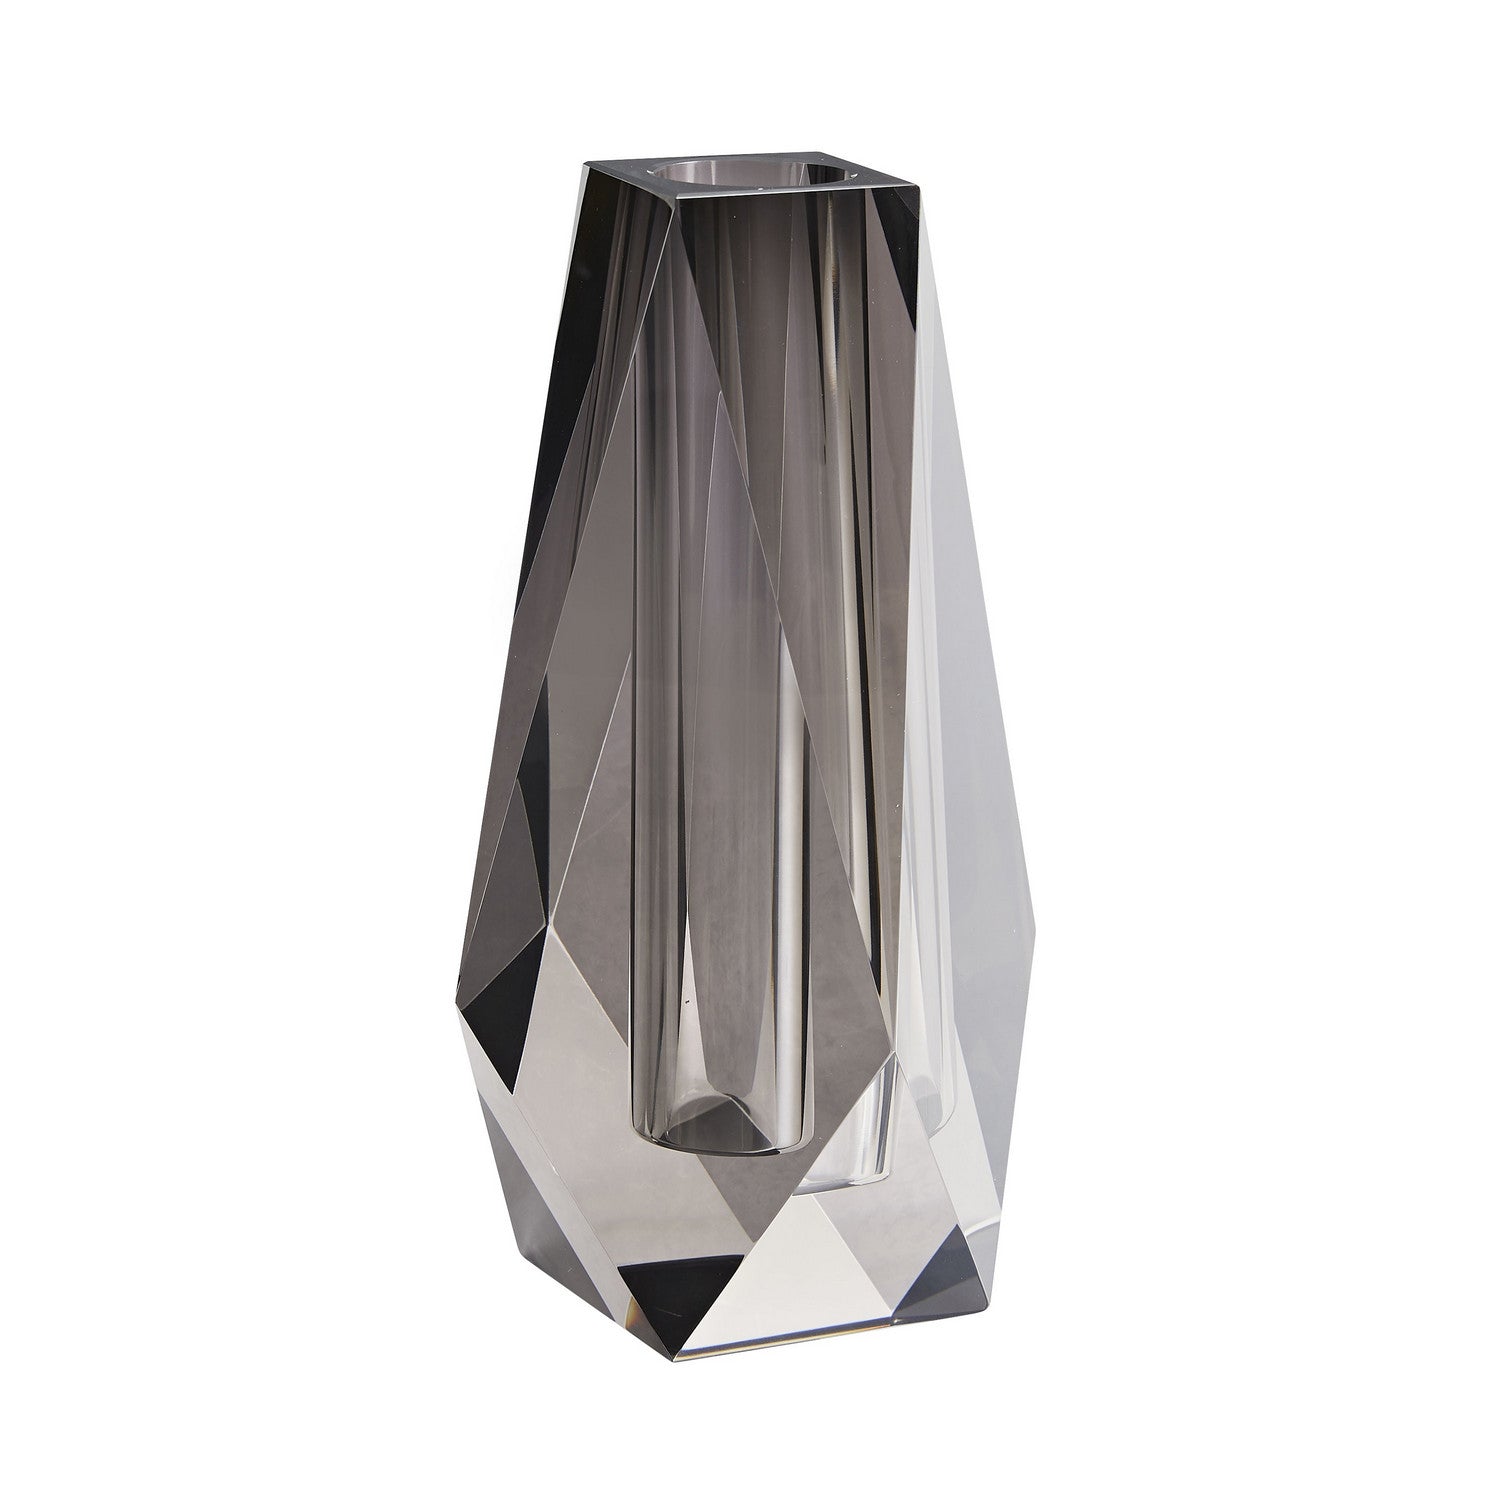 Vase from the Gemma collection in Smoke finish